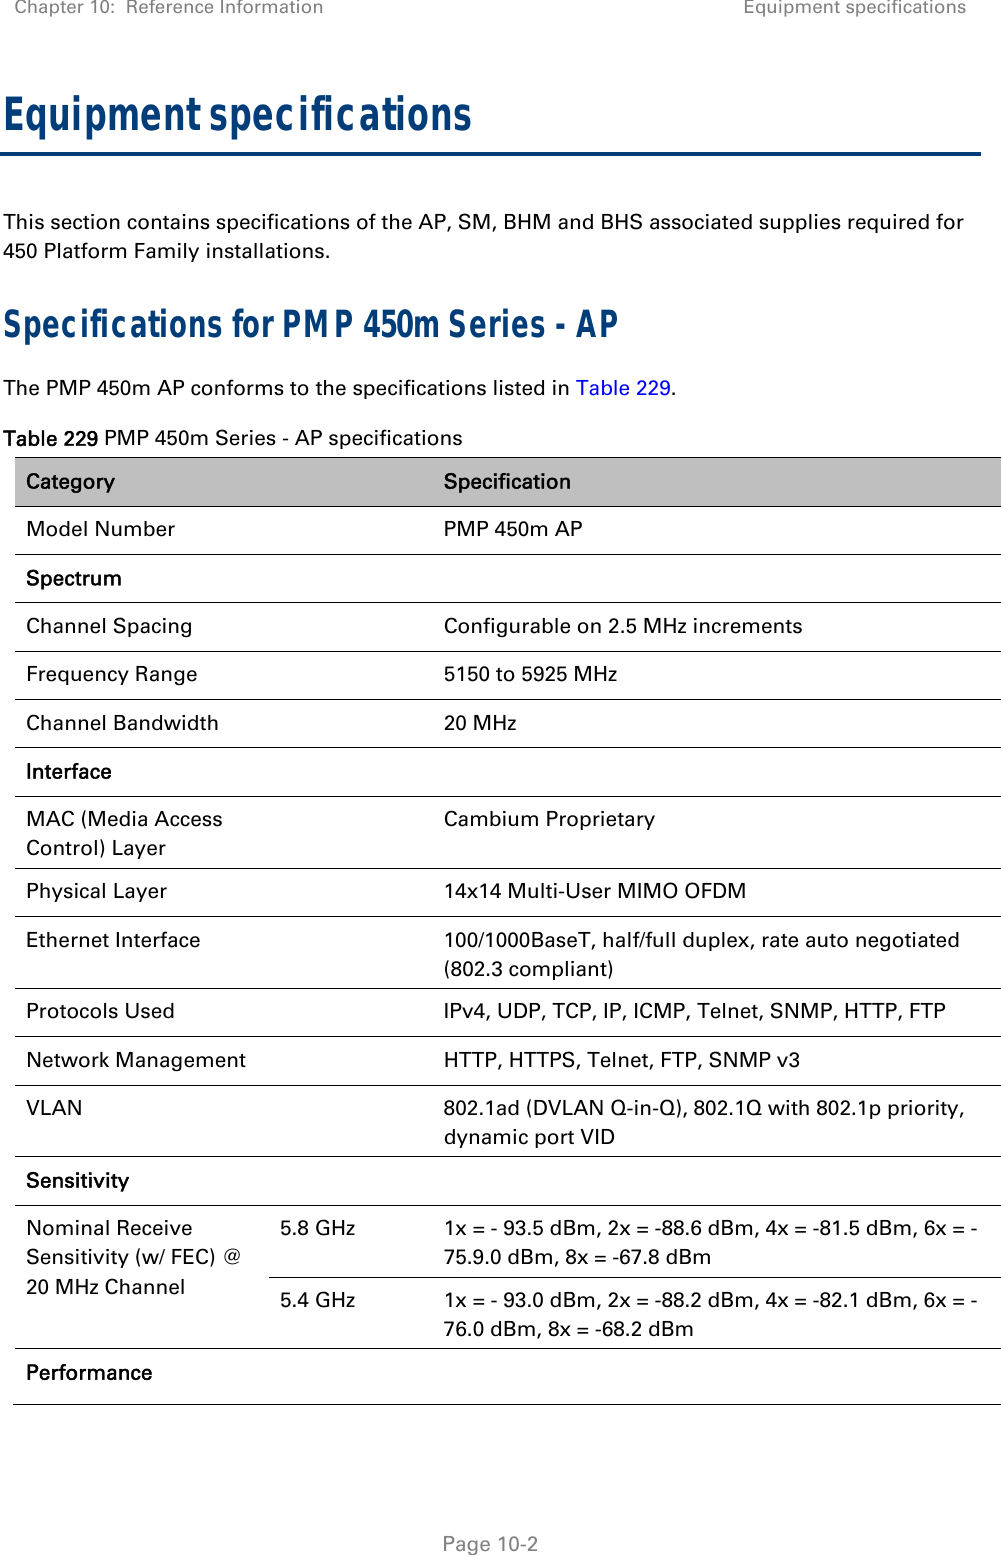 Chapter 10:  Reference Information Equipment specifications   Page 10-2 Equipment specifications This section contains specifications of the AP, SM, BHM and BHS associated supplies required for 450 Platform Family installations. Specifications for PMP 450m Series - AP The PMP 450m AP conforms to the specifications listed in Table 229. Table 229 PMP 450m Series - AP specifications Category   Specification Model Number    PMP 450m AP Spectrum    Channel Spacing    Configurable on 2.5 MHz increments Frequency Range    5150 to 5925 MHz Channel Bandwidth    20 MHz Interface    MAC (Media Access Control) Layer  Cambium Proprietary Physical Layer    14x14 Multi-User MIMO OFDM Ethernet Interface    100/1000BaseT, half/full duplex, rate auto negotiated (802.3 compliant) Protocols Used    IPv4, UDP, TCP, IP, ICMP, Telnet, SNMP, HTTP, FTP Network Management    HTTP, HTTPS, Telnet, FTP, SNMP v3 VLAN    802.1ad (DVLAN Q-in-Q), 802.1Q with 802.1p priority, dynamic port VID Sensitivity     Nominal Receive Sensitivity (w/ FEC) @ 20 MHz Channel 5.8 GHz  1x = - 93.5 dBm, 2x = -88.6 dBm, 4x = -81.5 dBm, 6x = -75.9.0 dBm, 8x = -67.8 dBm 5.4 GHz  1x = - 93.0 dBm, 2x = -88.2 dBm, 4x = -82.1 dBm, 6x = -76.0 dBm, 8x = -68.2 dBm Performance    